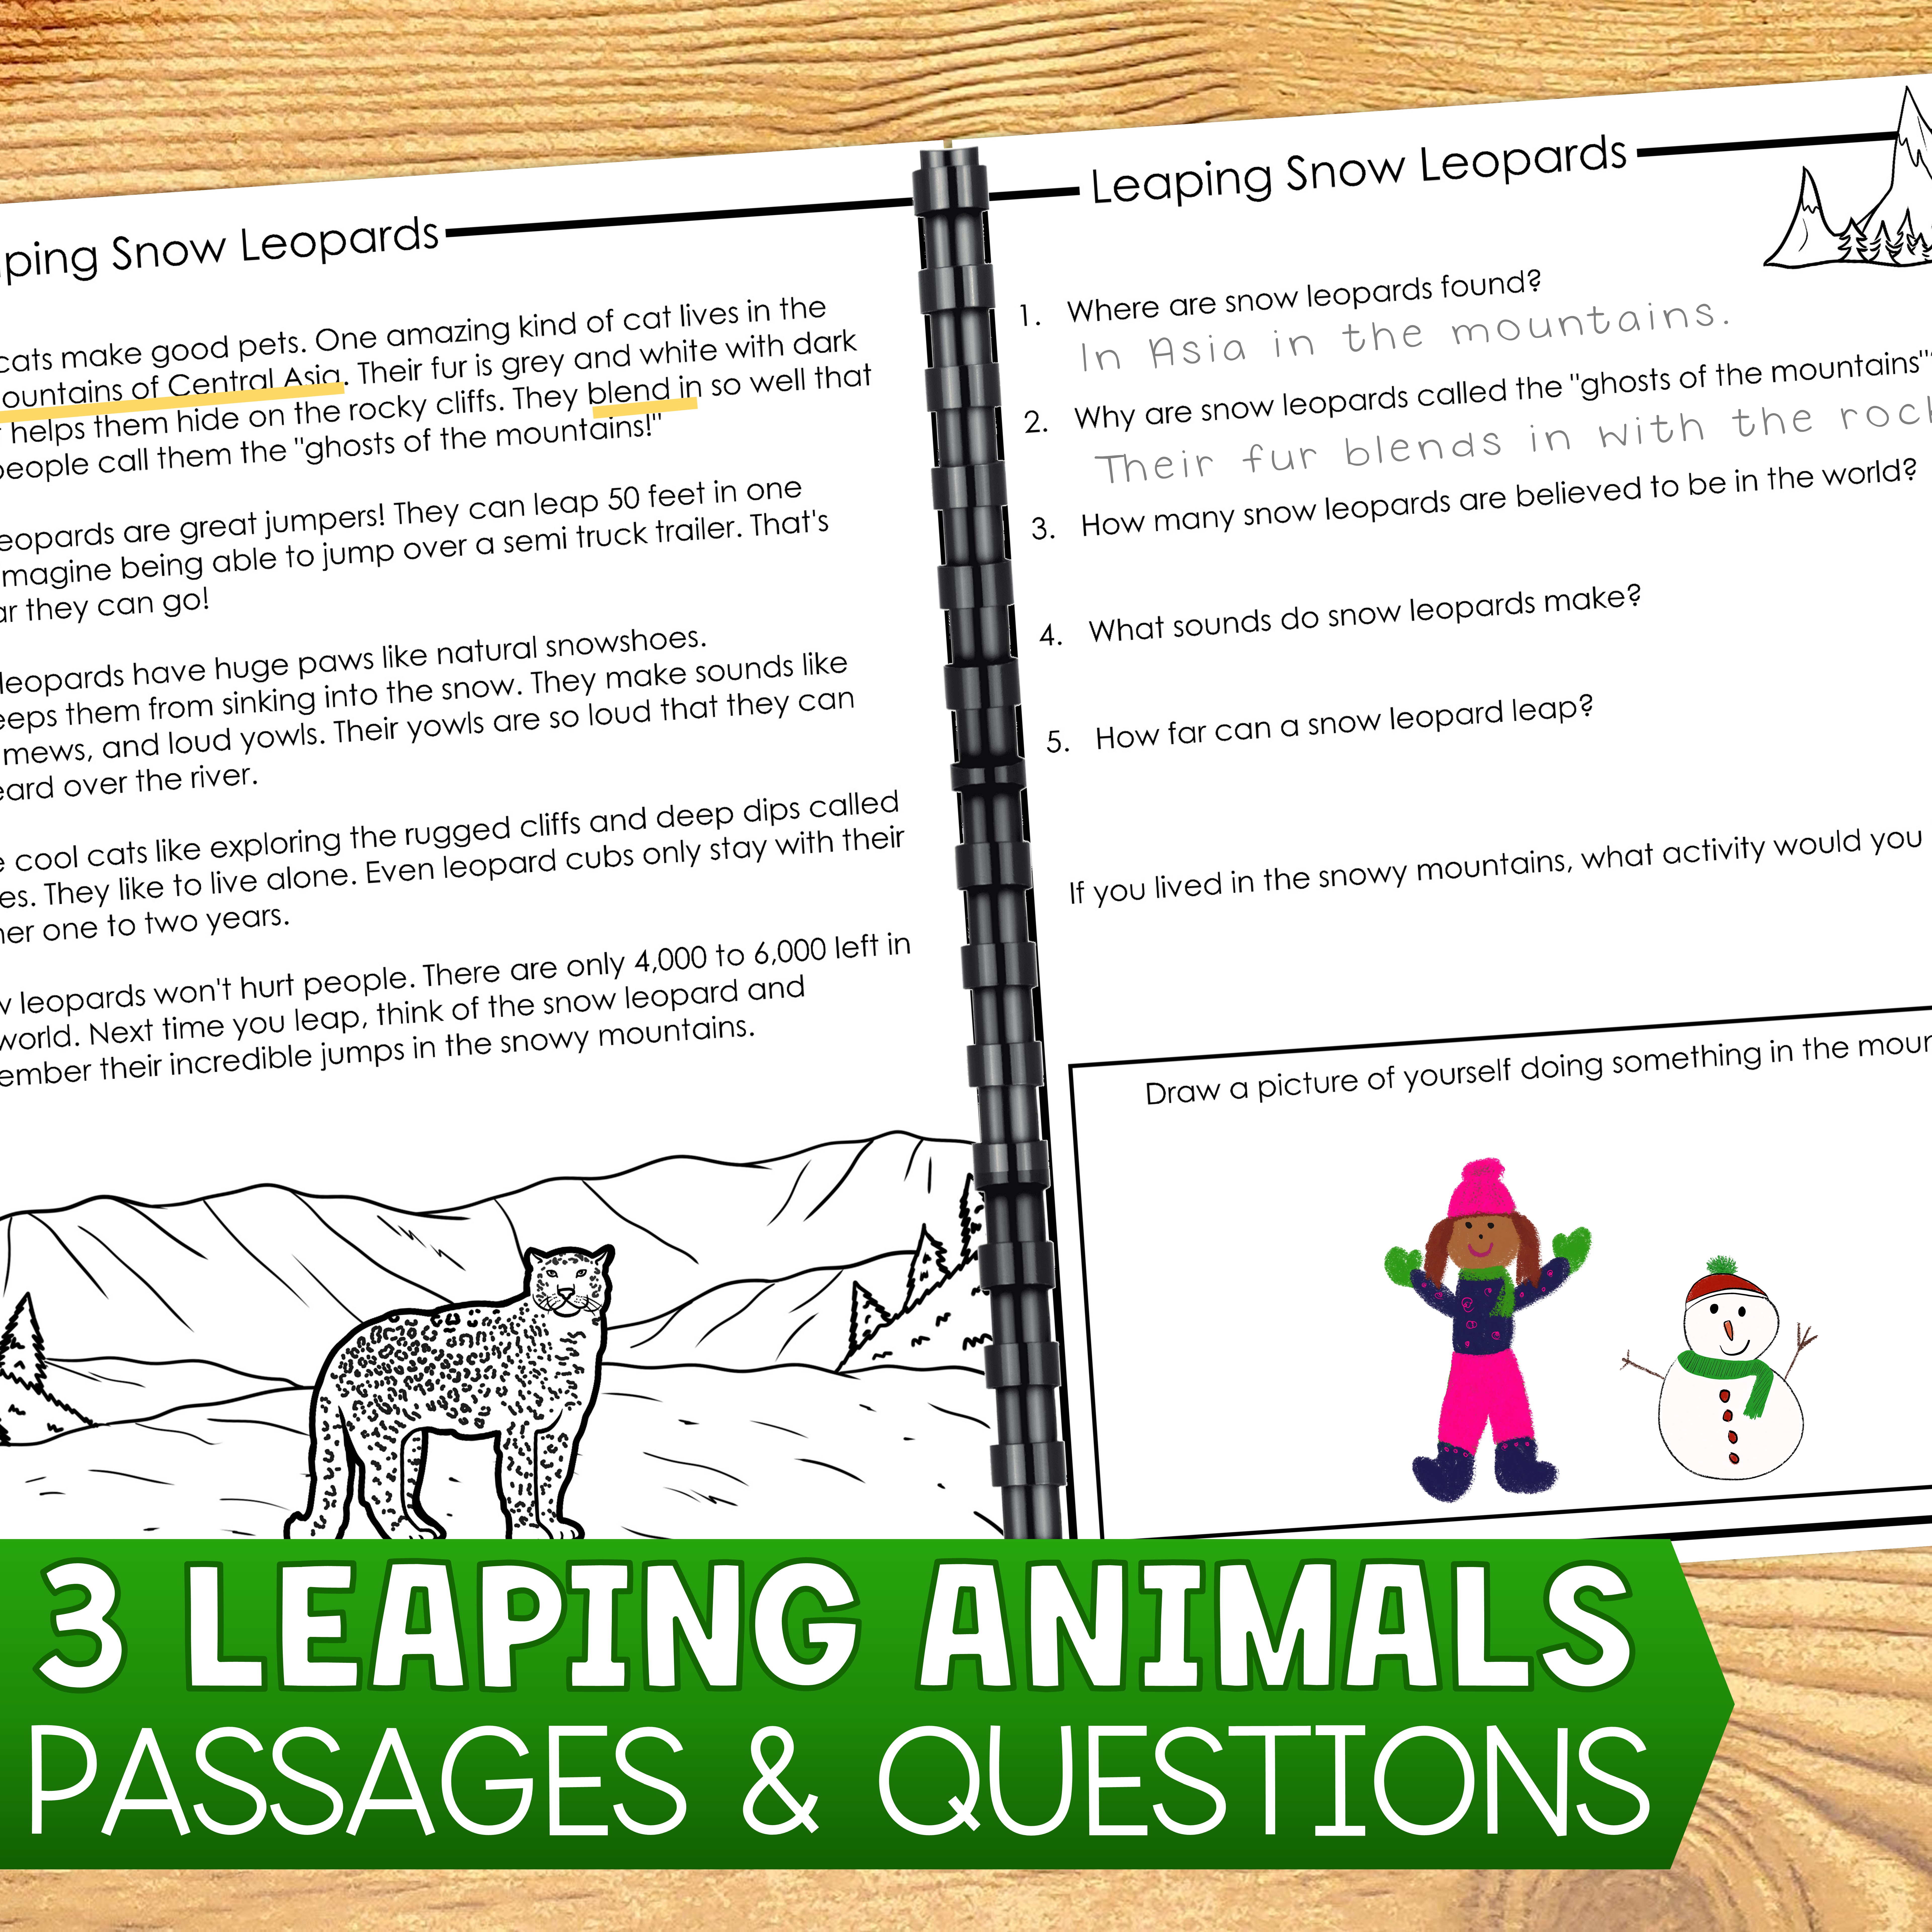 Leaping Animals Passages and Questions